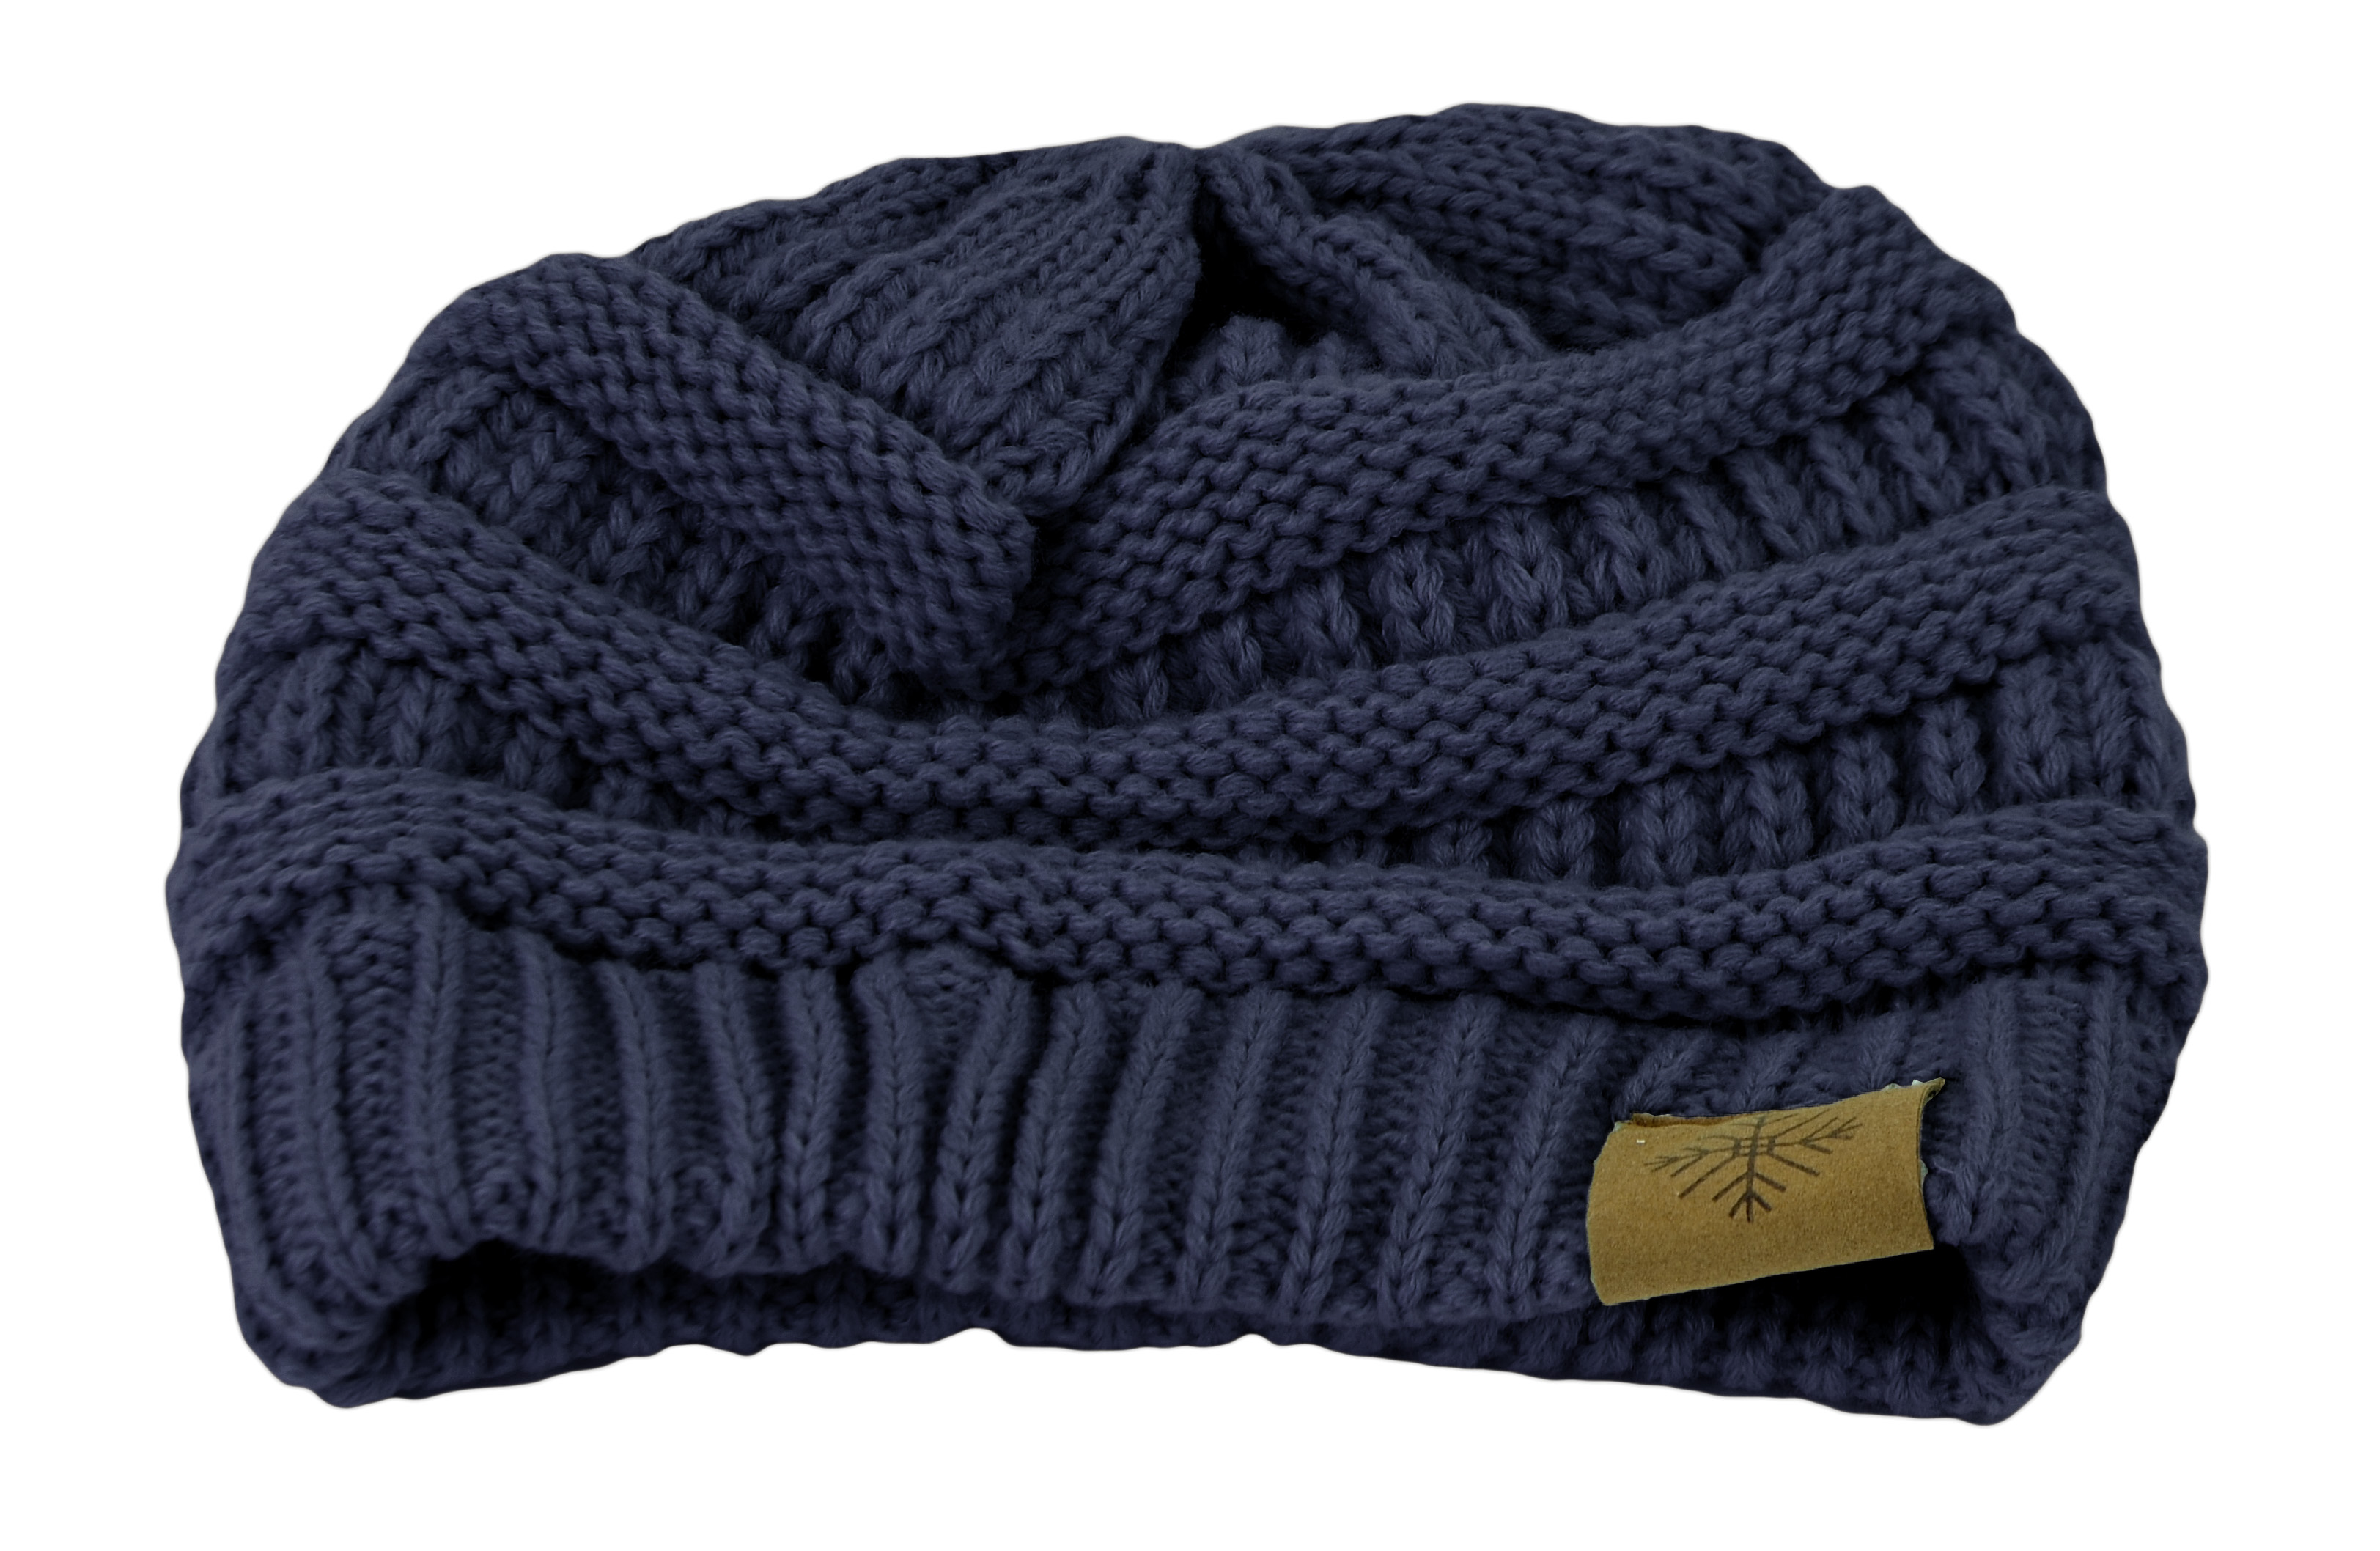 Belle Donne Women / Men Cable Slouchy Beanie Winter Hats Oversized Baggy Knitted - Navy Blue